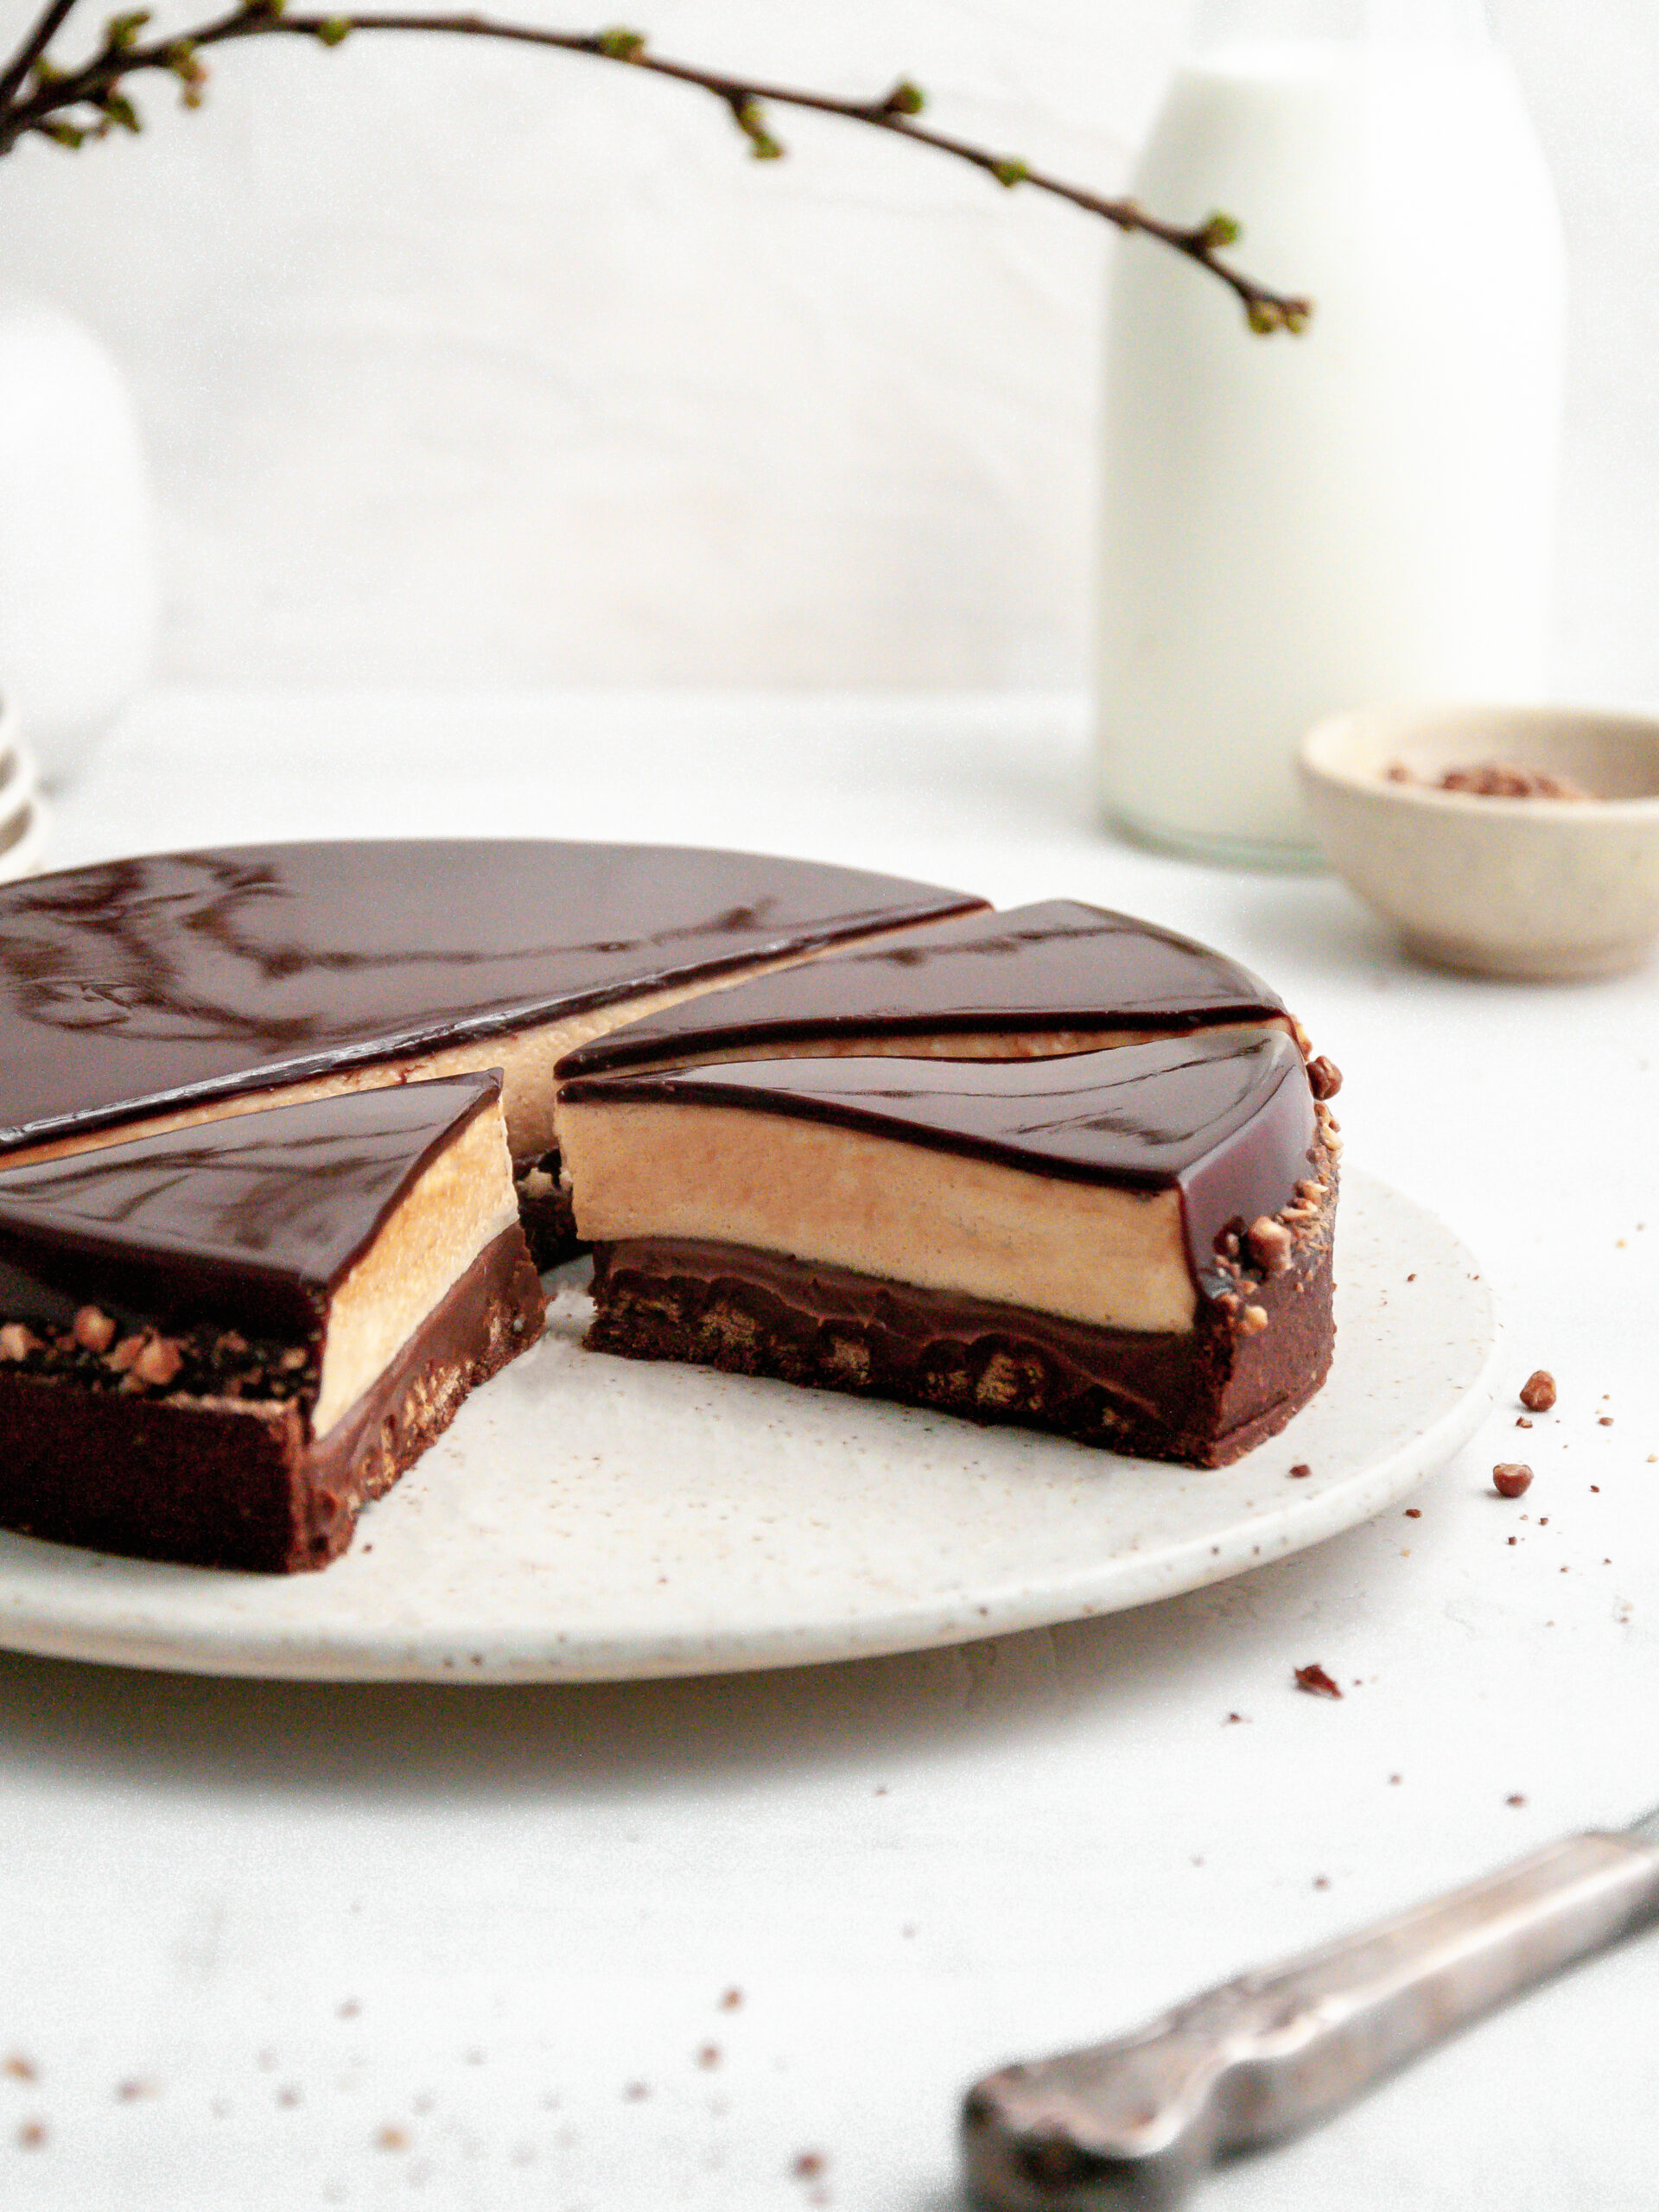 Chocolate Coffee and Caramel Tart cut into slices.